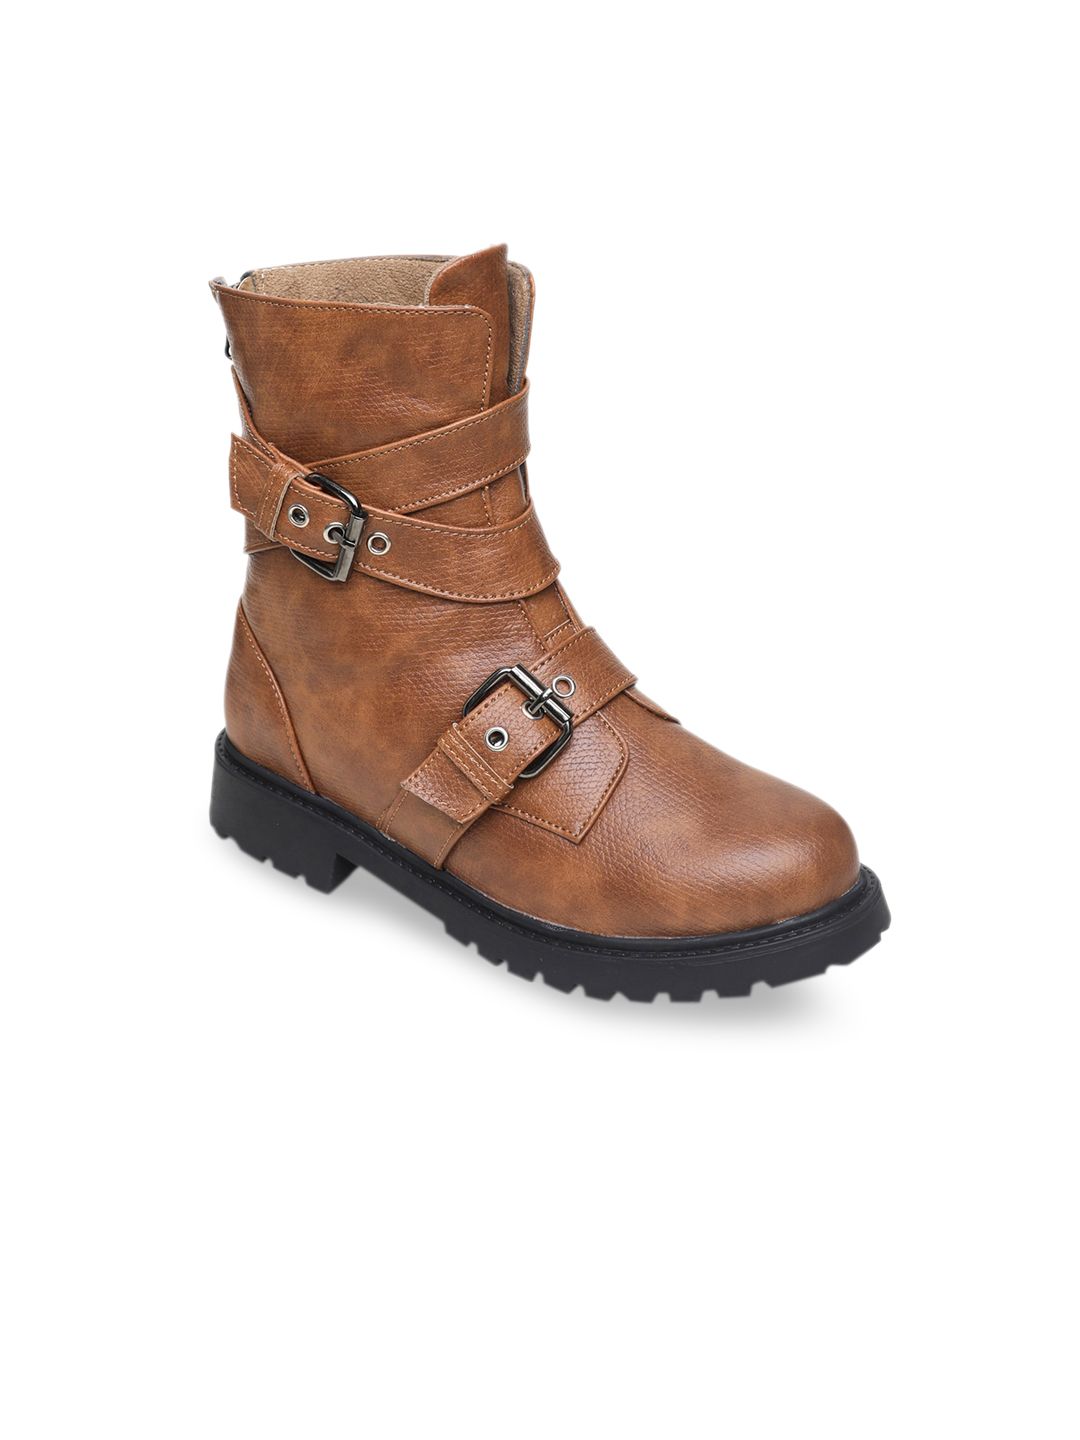 VALIOSAA Women Tan High-Top Block Heeled Boots with Buckles Price in India